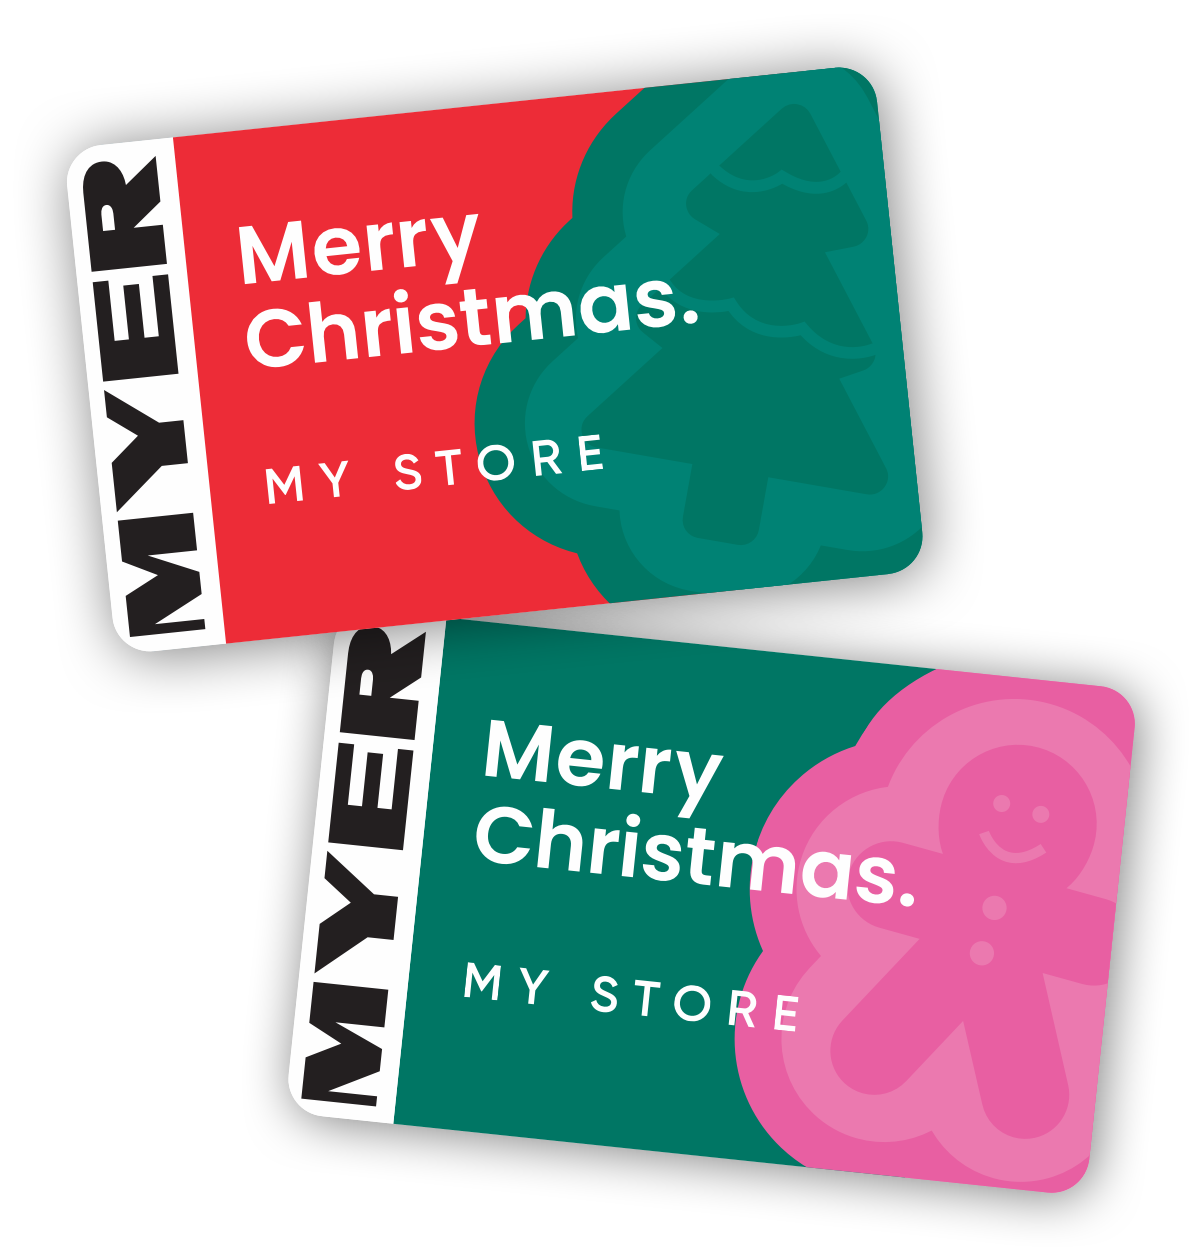 Gift card image